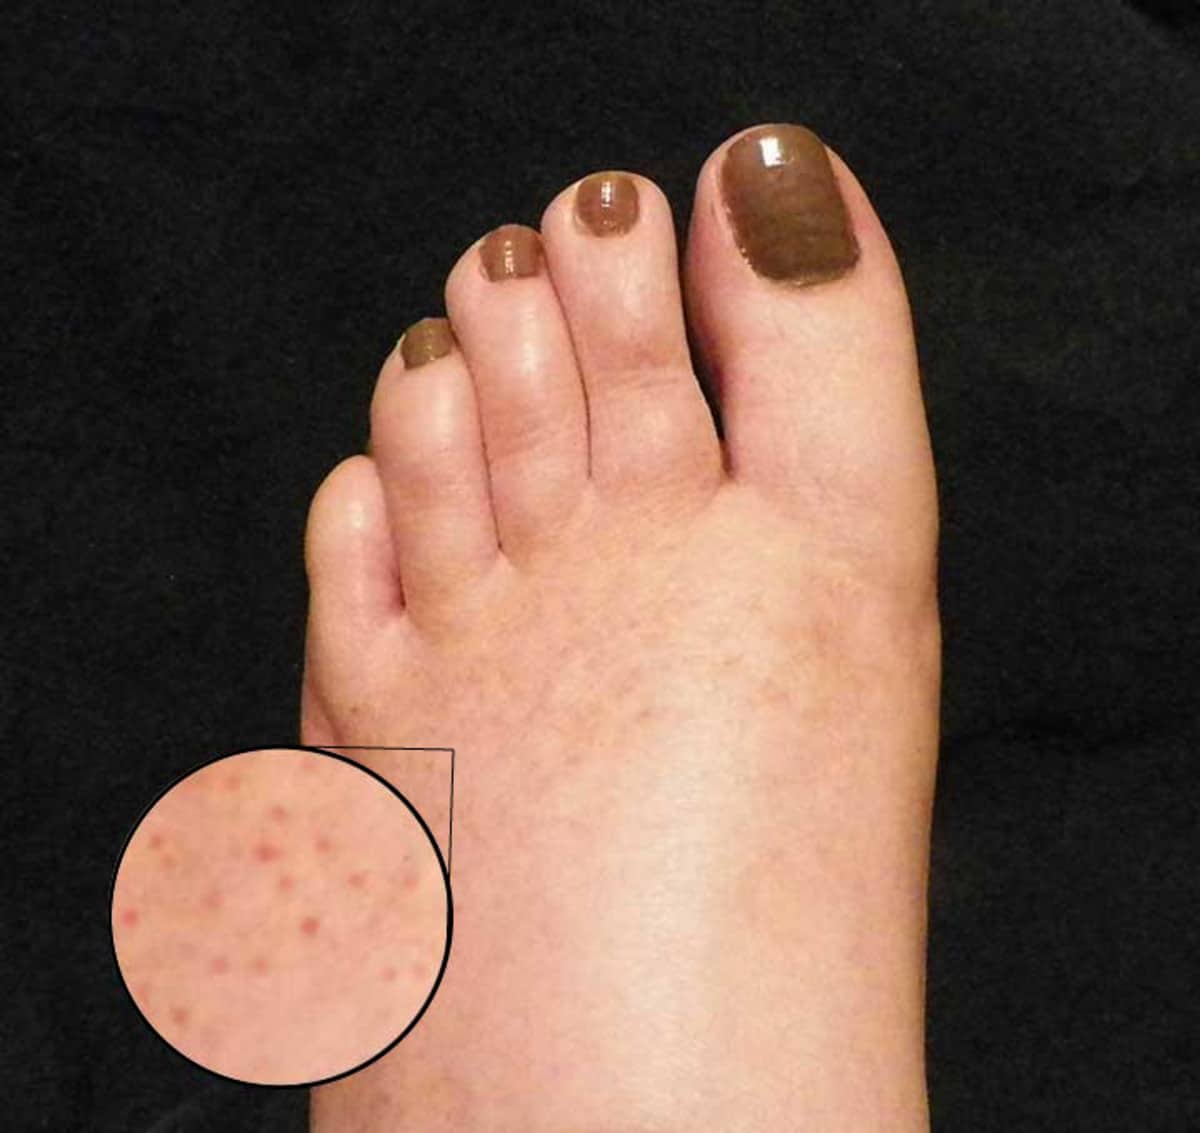 Causes of Red Dots on Feet